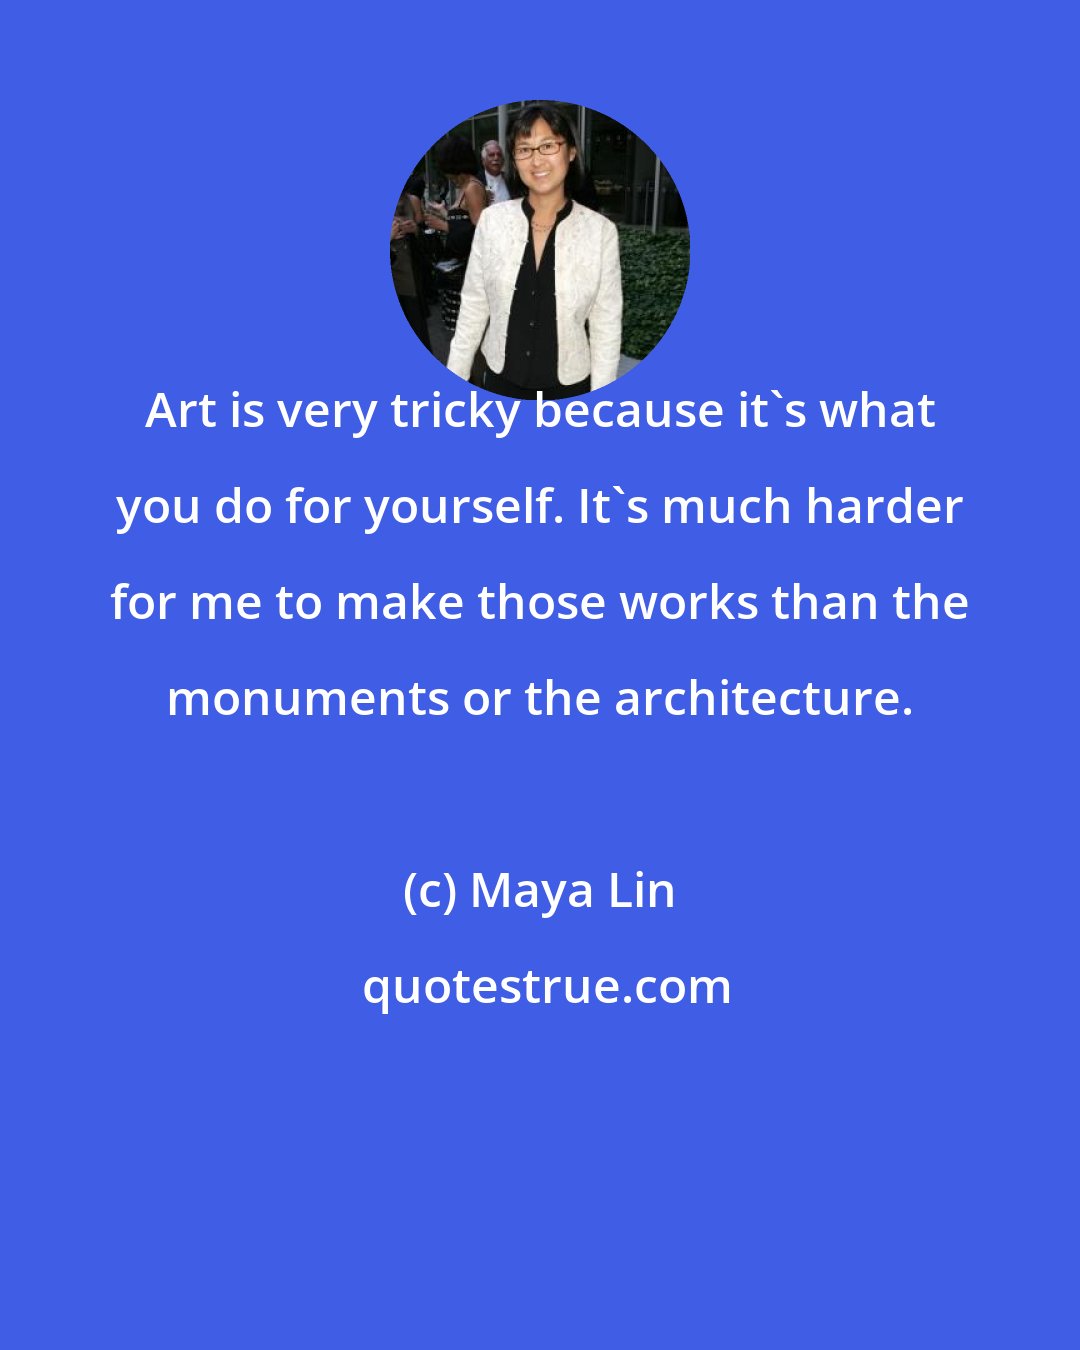 Maya Lin: Art is very tricky because it's what you do for yourself. It's much harder for me to make those works than the monuments or the architecture.